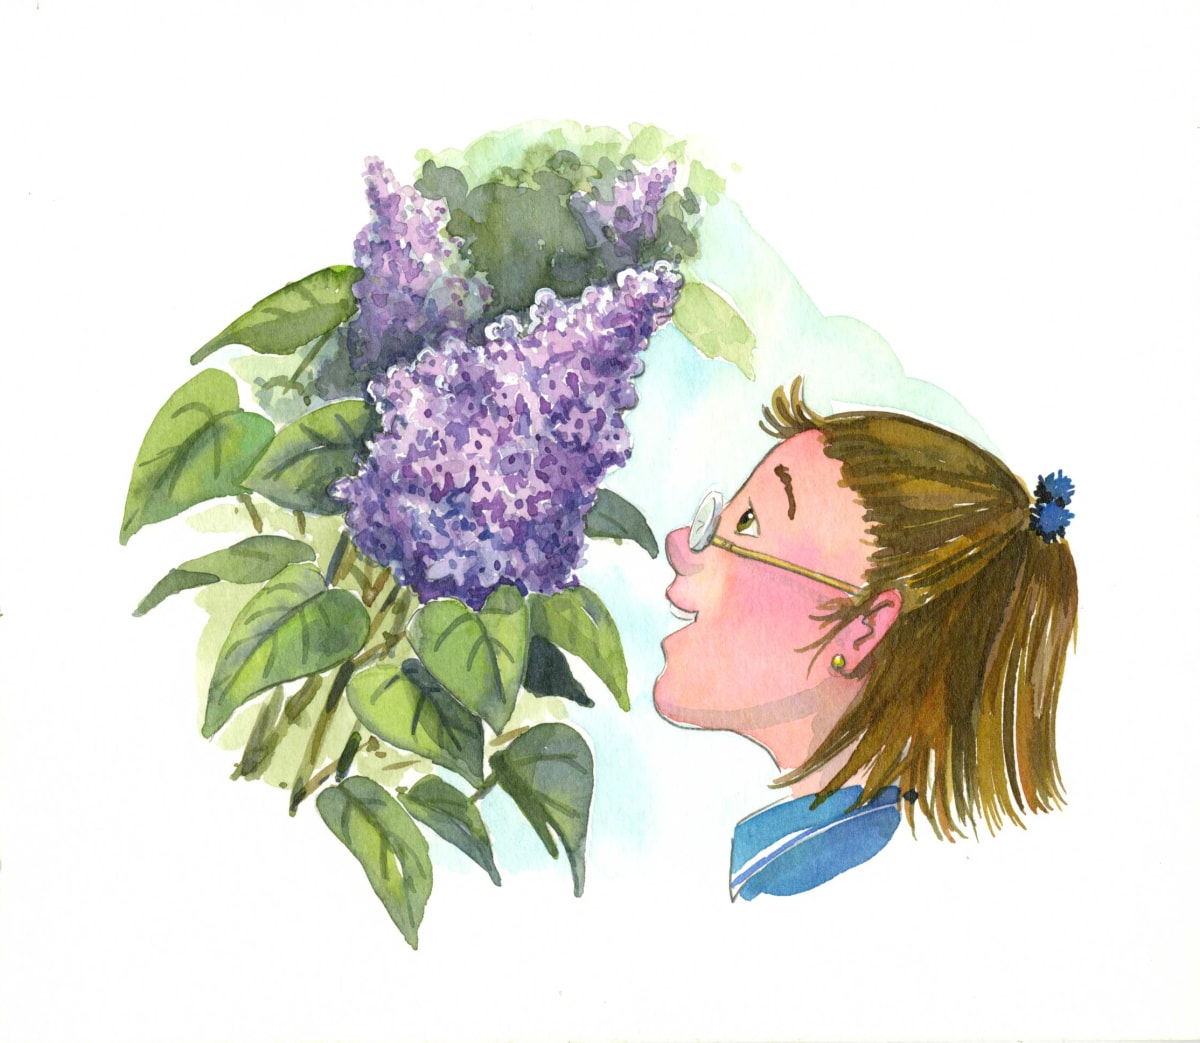 Spring Lilacs  Image: Lilacs, February 2001, Canadian Living Magazine: "Family Briefs ages 6-12"